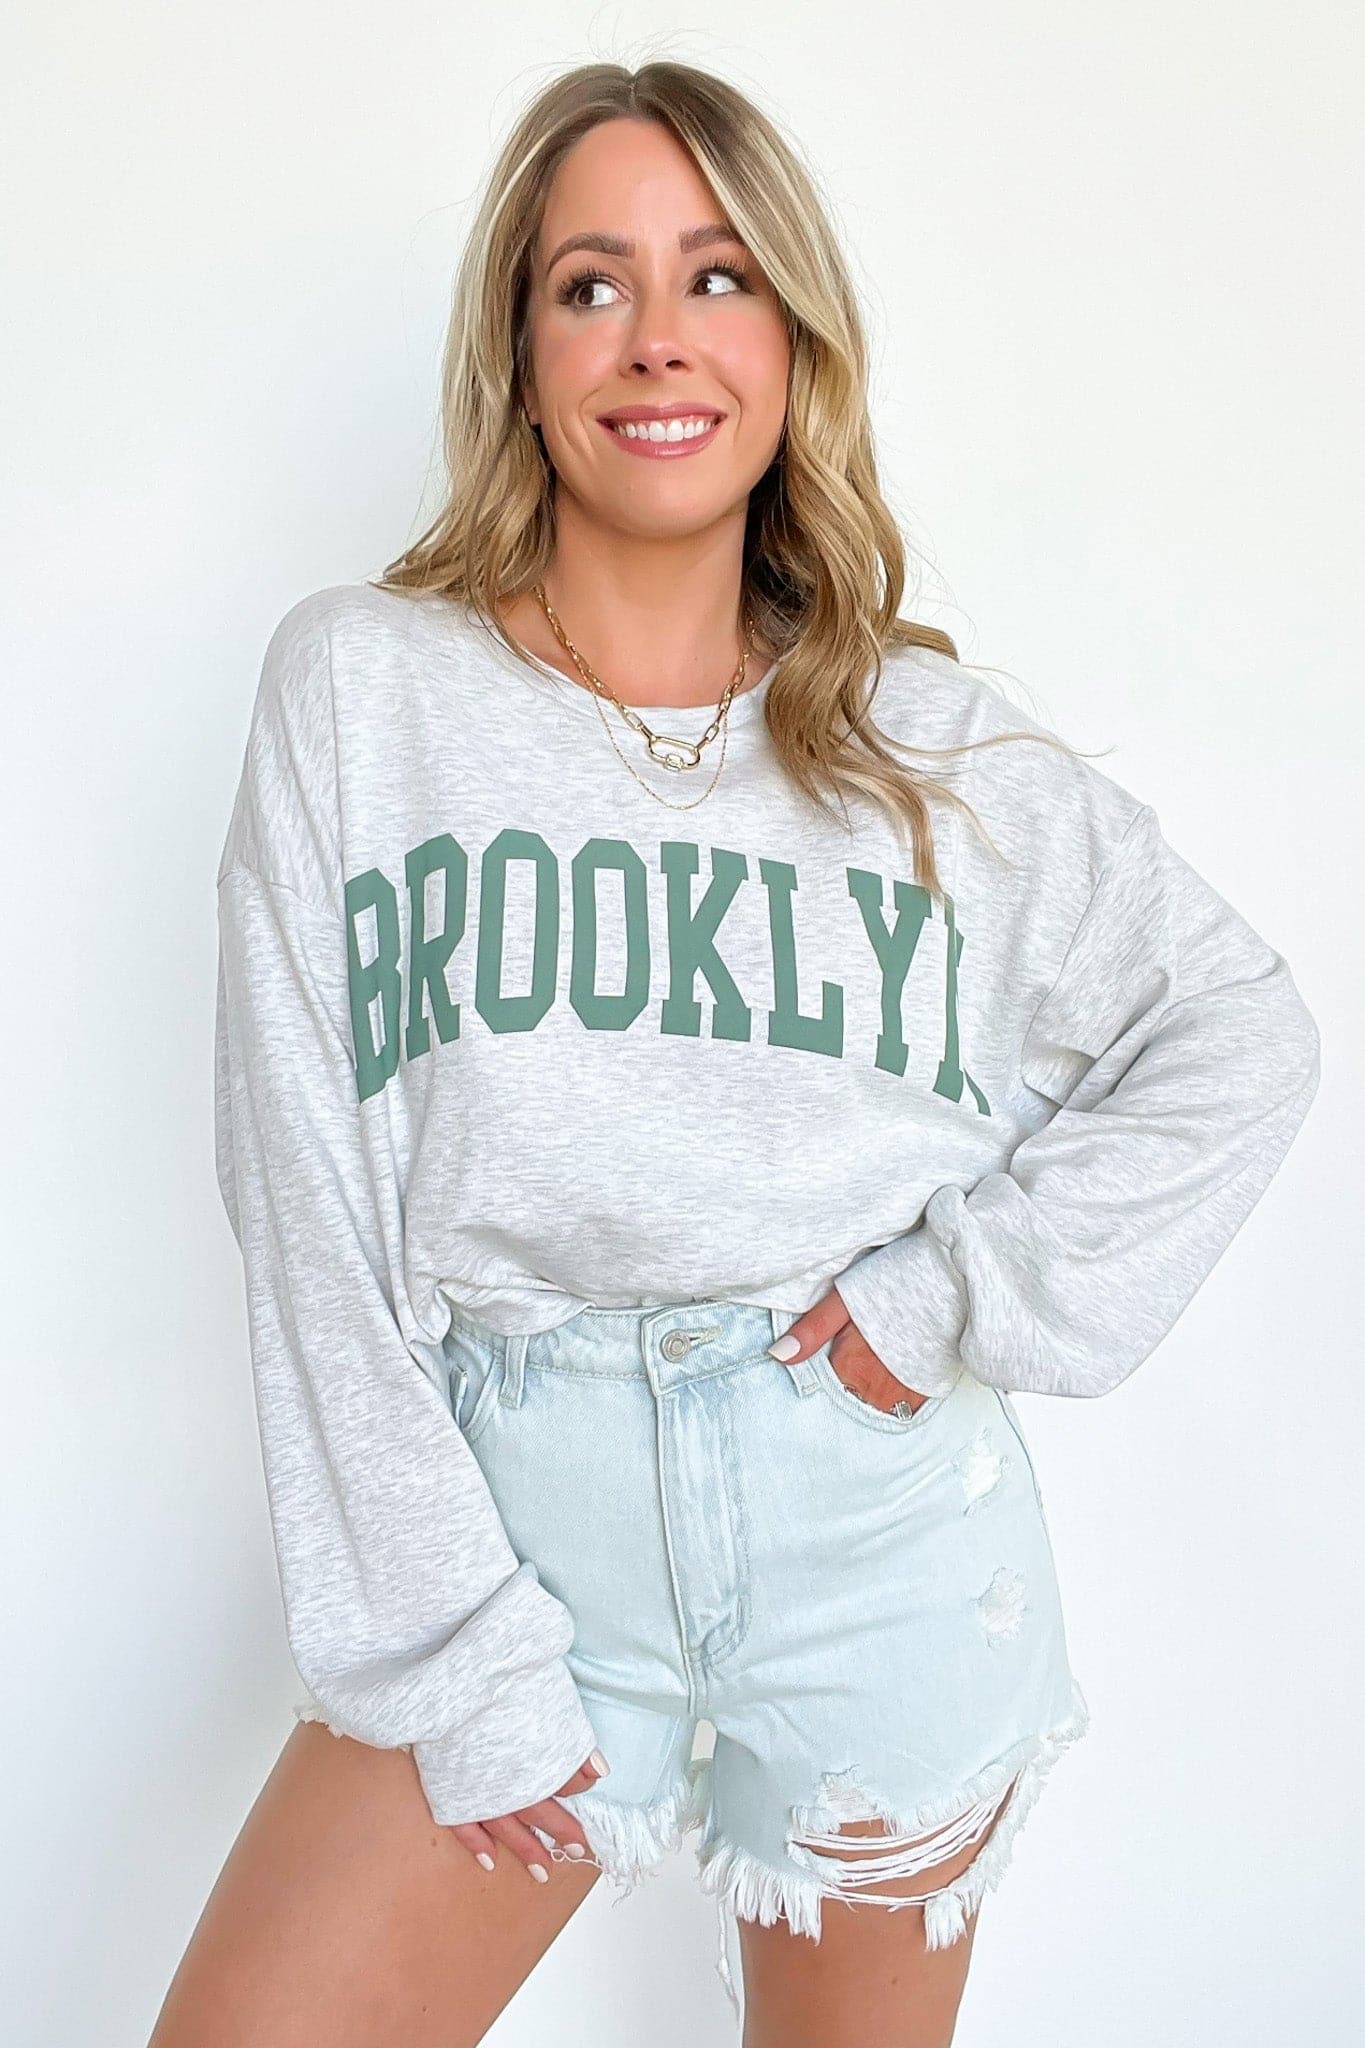  BROOKLYN Oversized Vintage Graphic Pullover - BACK IN STOCK - Madison and Mallory